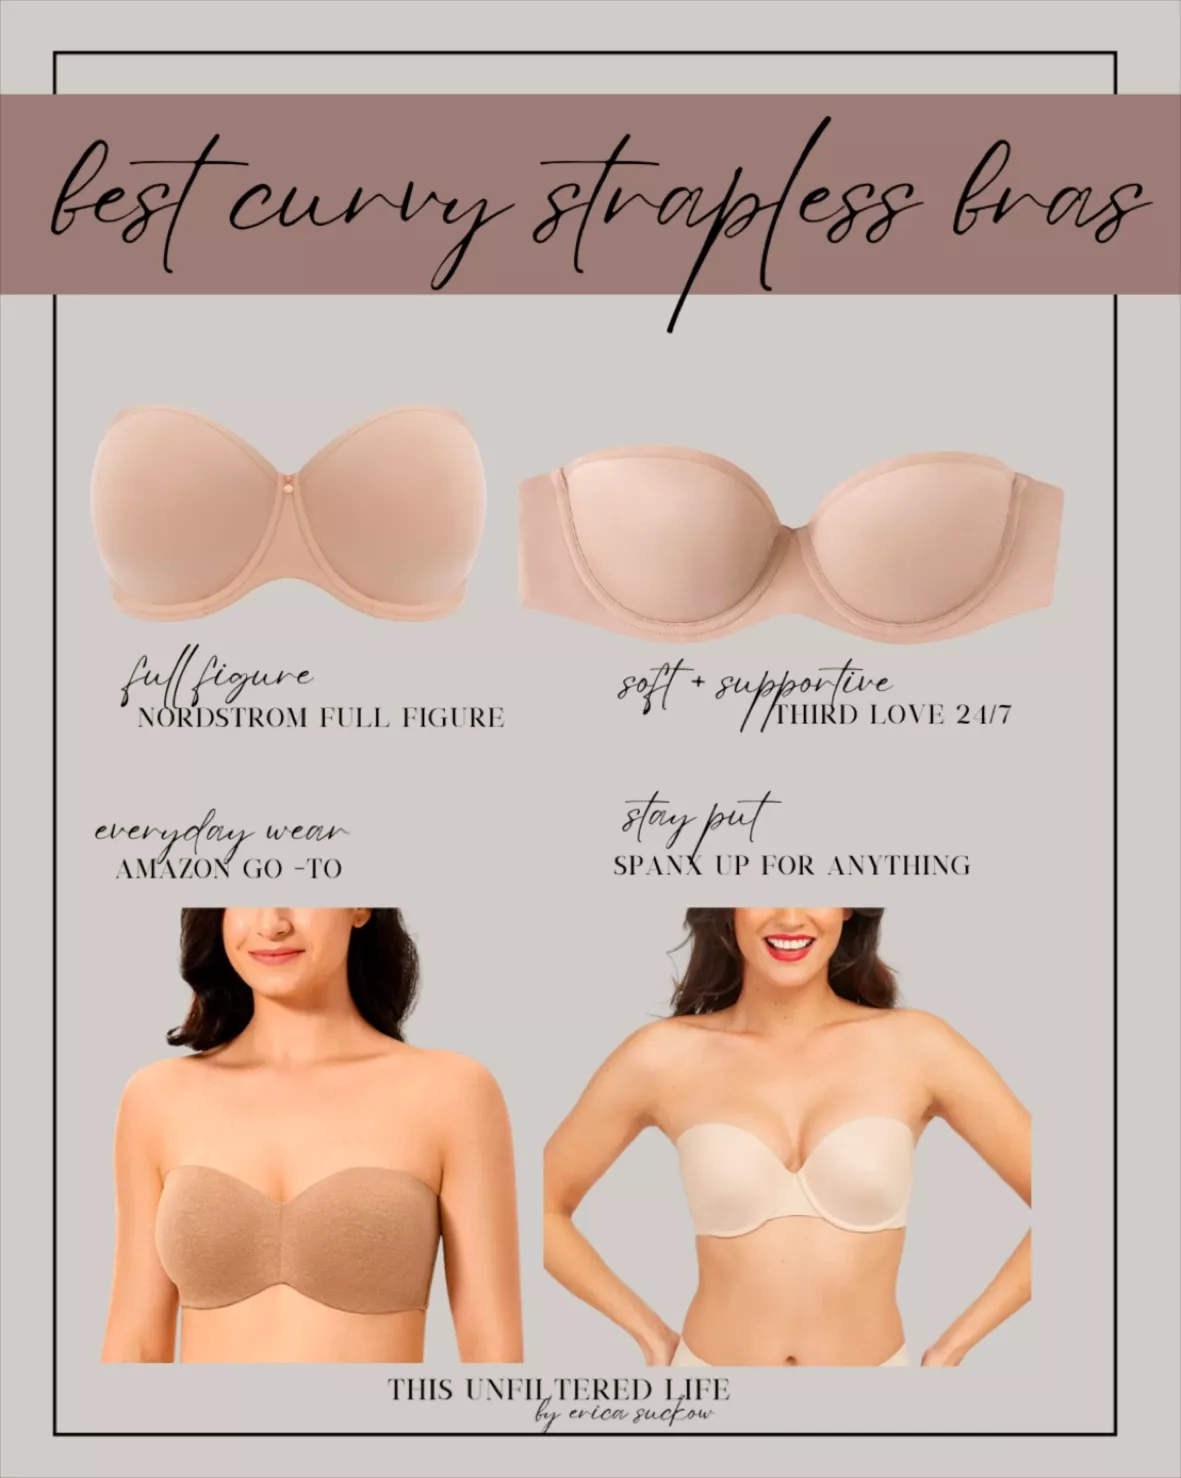 Give yourself the beauty rest you deserve. Shecurve Strapless Bra